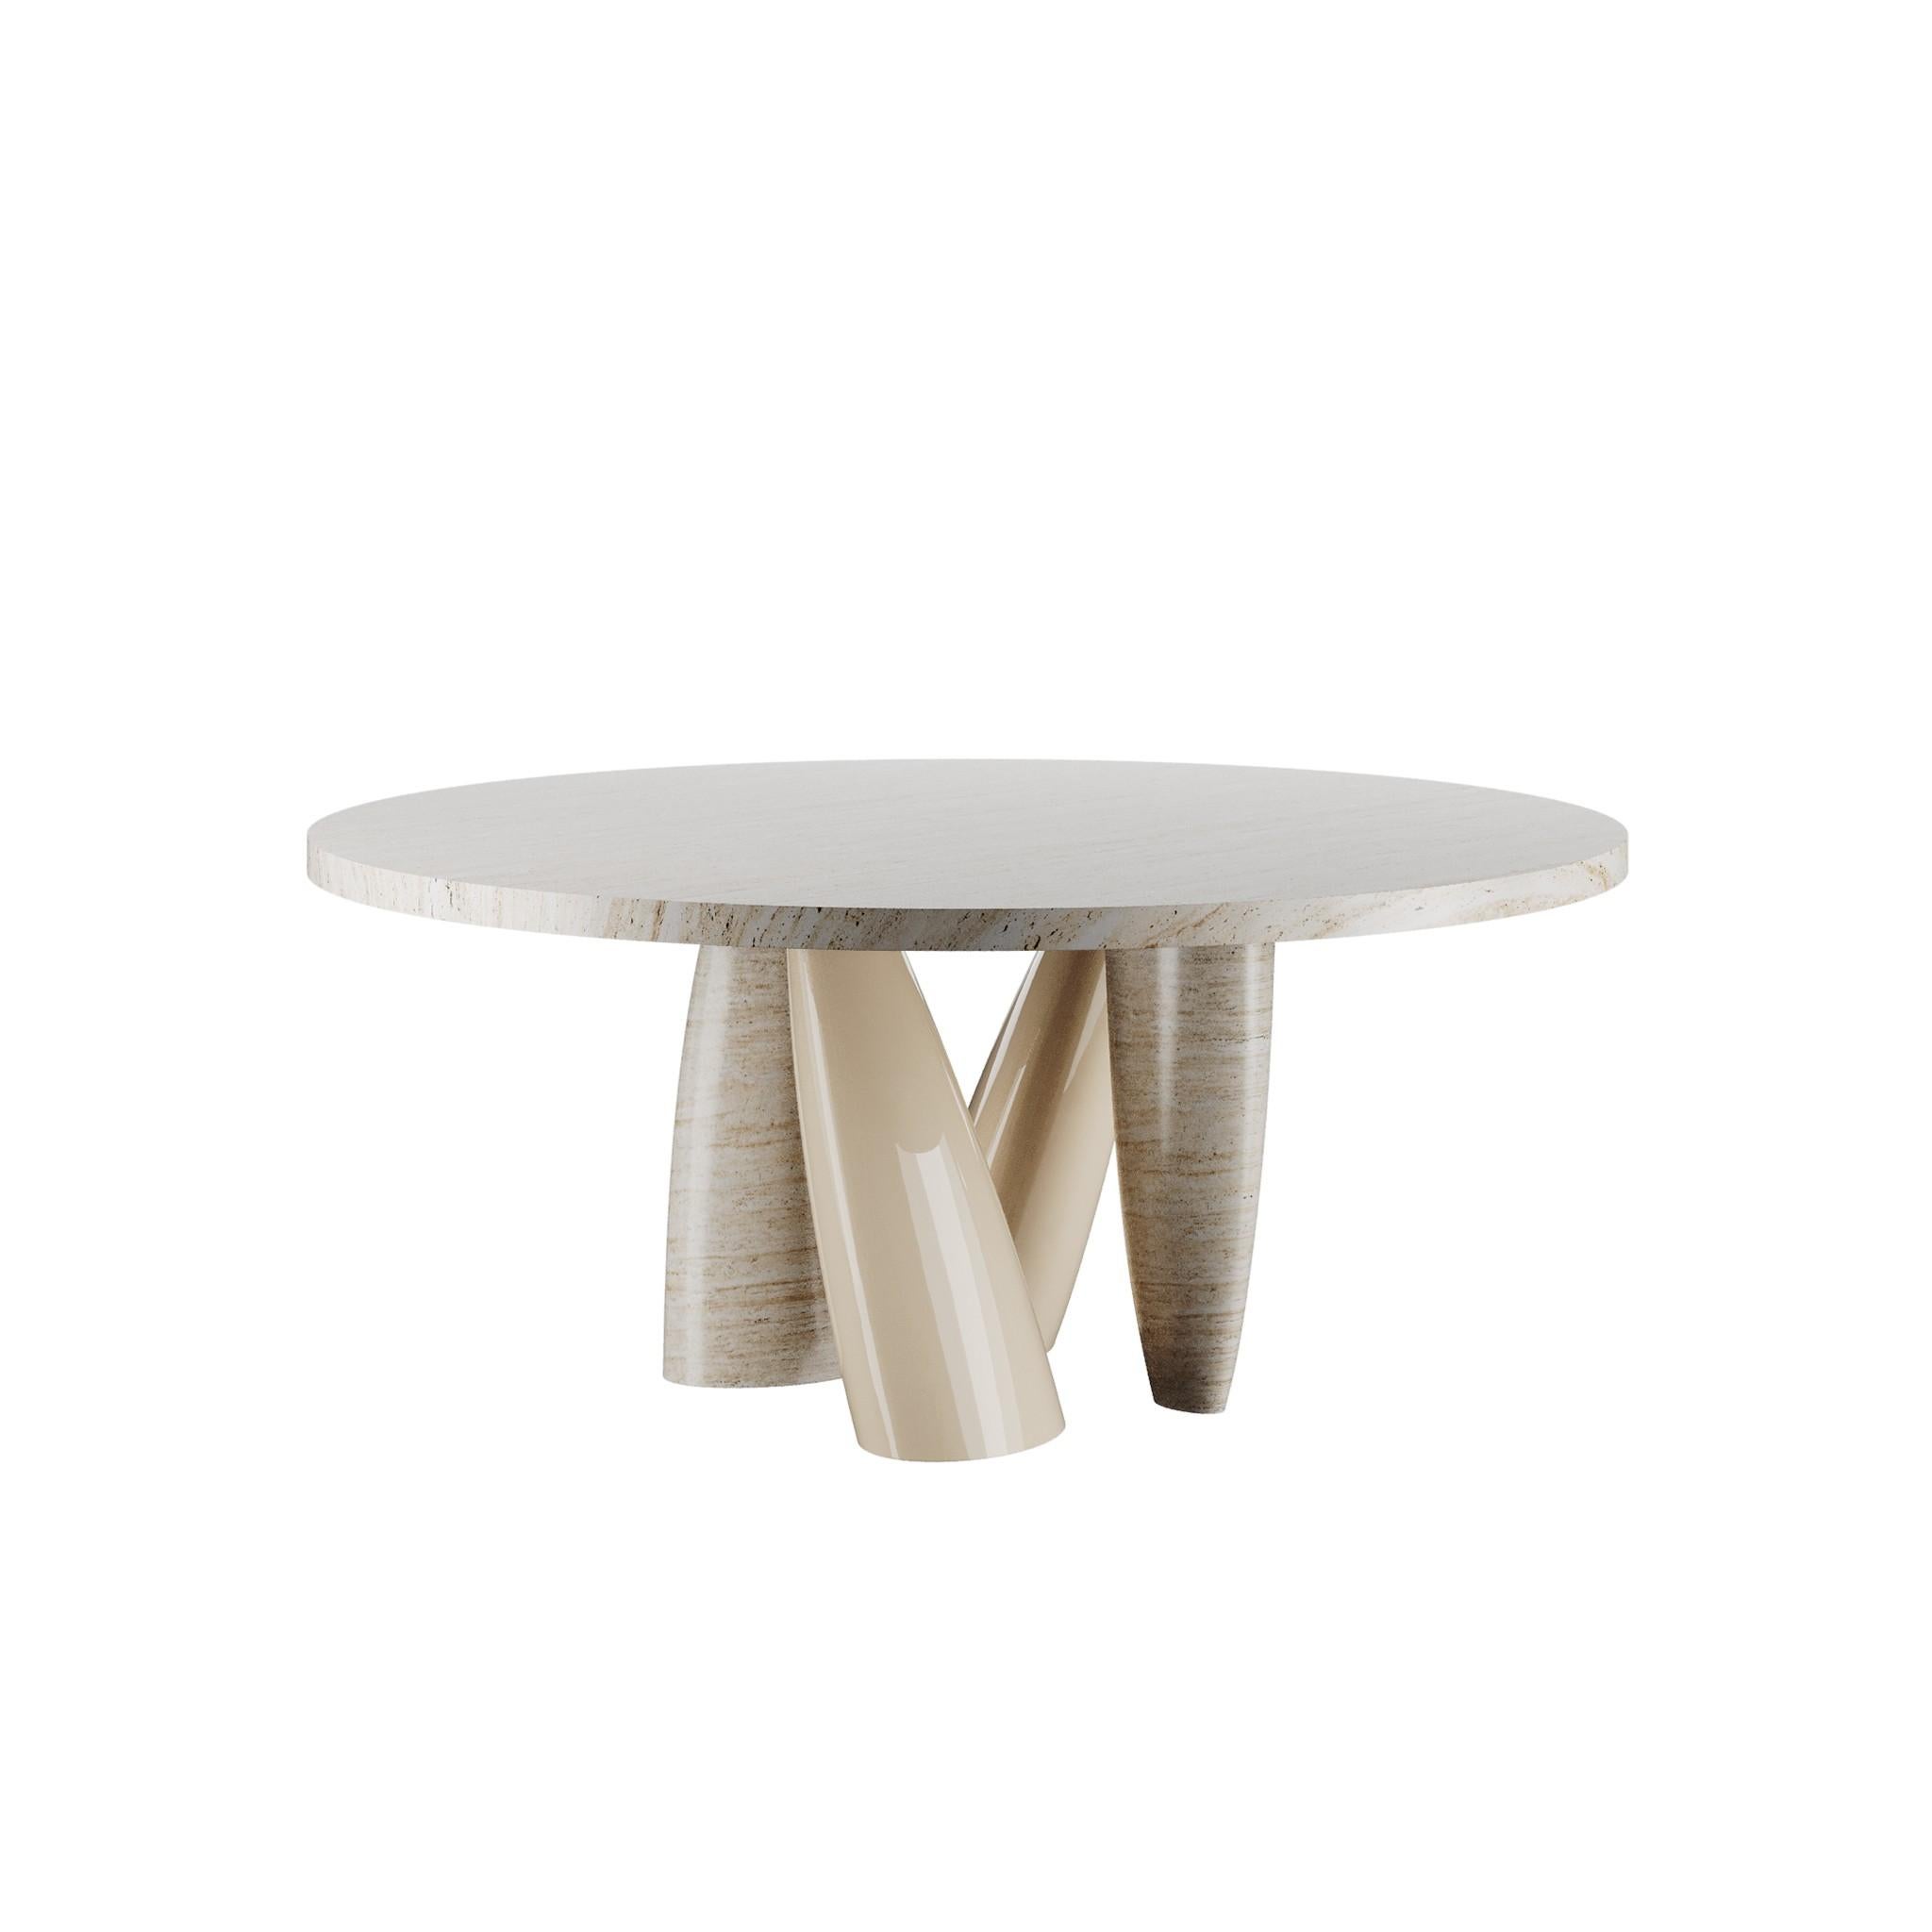 Billie Round Dining Table Travertine is a modern dining table with a delicious texture and a rich swirl of natural colors. The simple layout of Billie Round Dining Table Travertine creates a warm yet sophisticated atmosphere within a modern dining